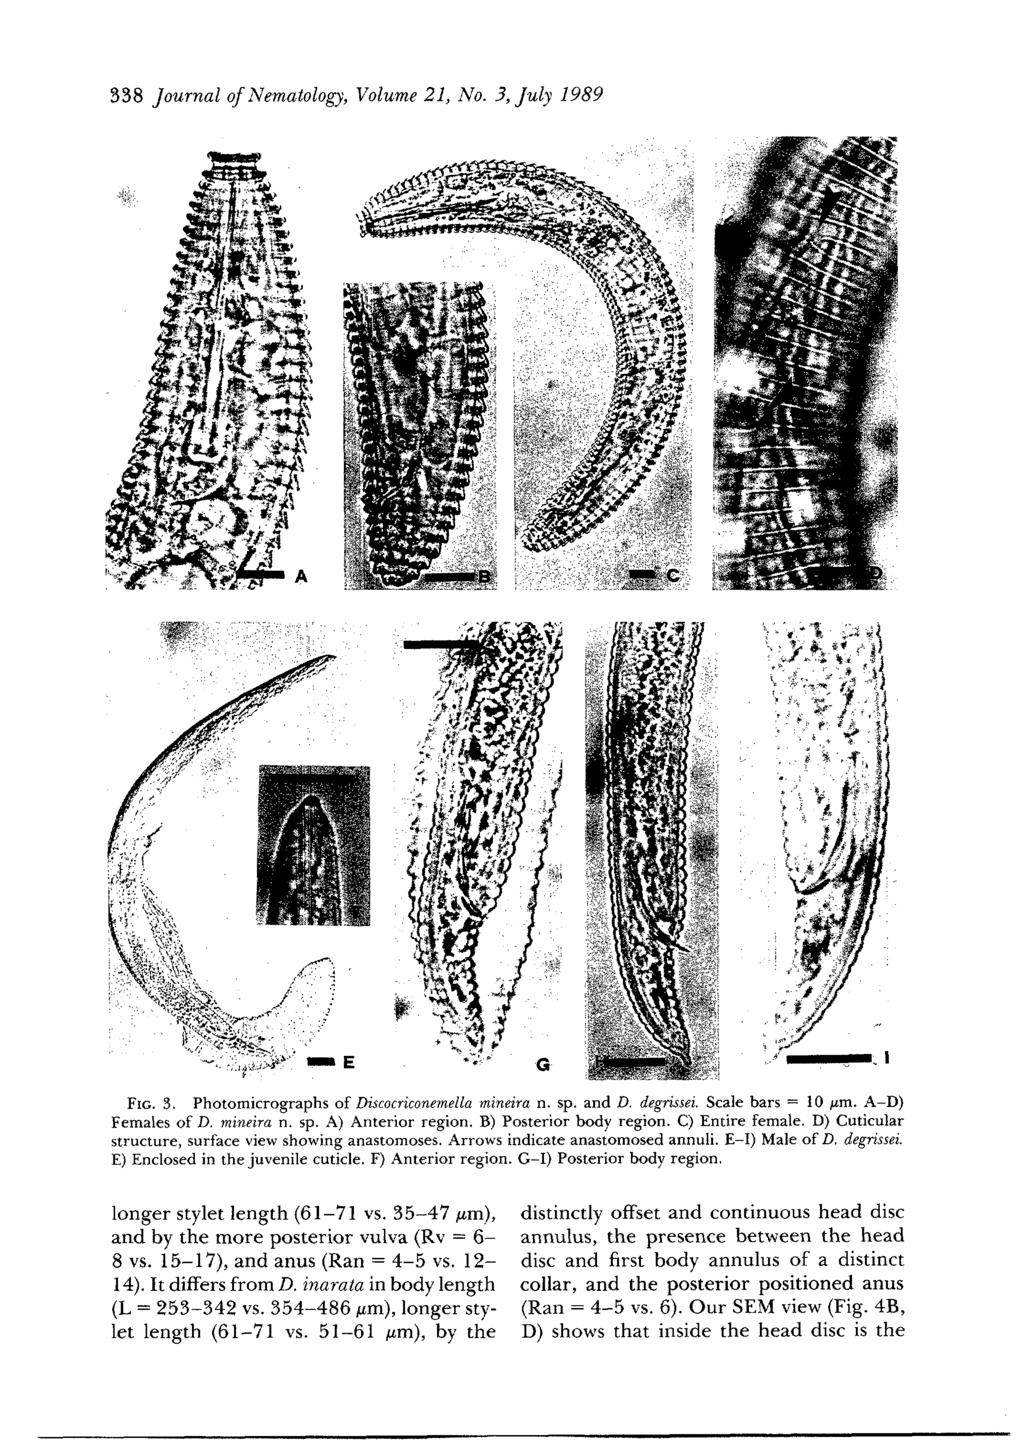 338 Journal of Nematology, Volume 21, No. 3, July 1989 : :?,, ' y : i '.;ZN~;-'e~';L :'; /"'." "] FIG. 3. Photomicrographs of Discocriconemella mineira n. sp. and D. degrissei. Scale bars = 10 ~m.